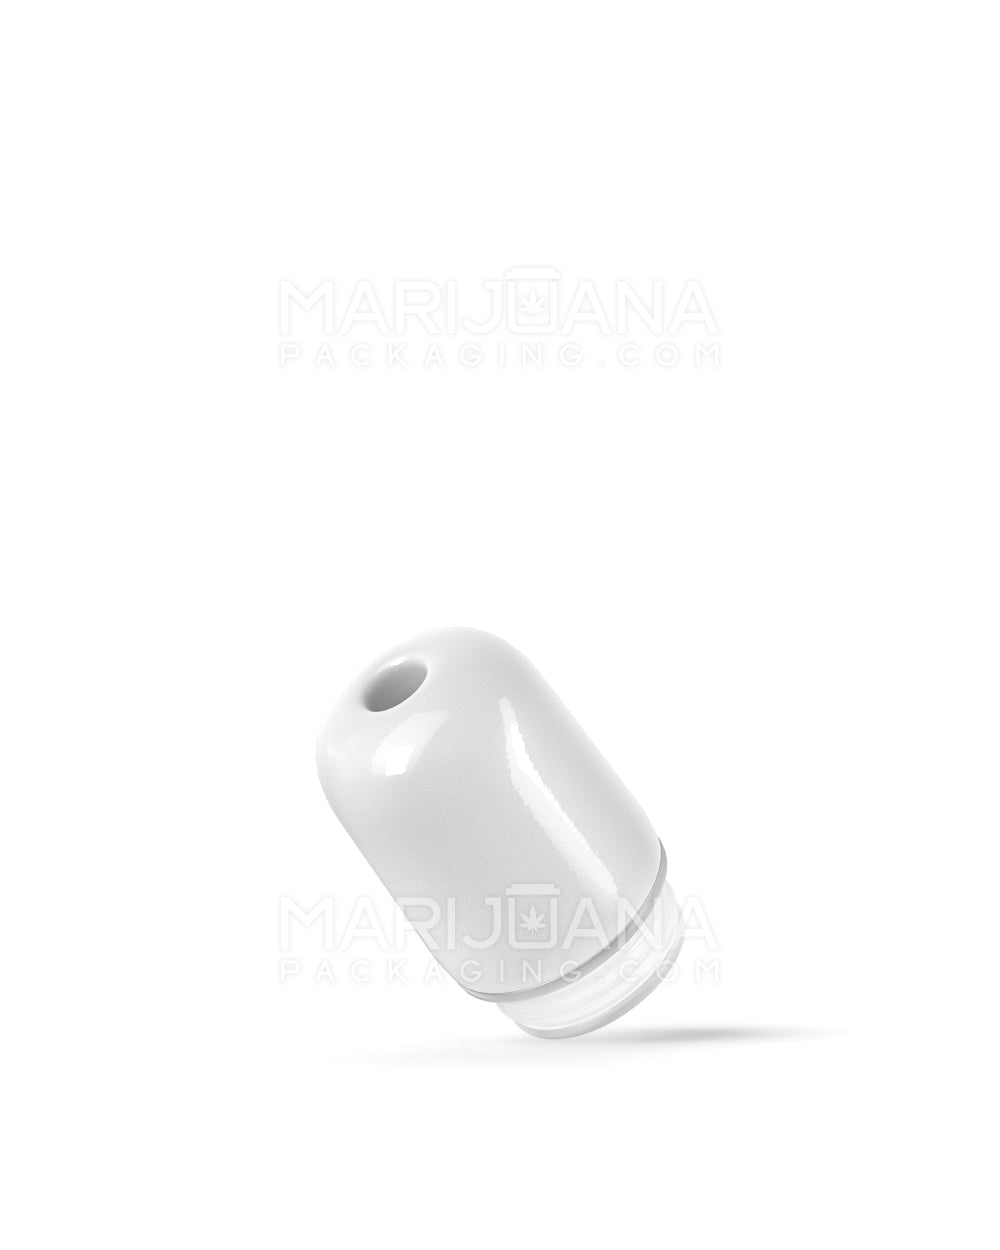 AVD | Round Vape Mouthpiece for Glass Cartridges | White Ceramic - Eazy Press - 600 Count - 4